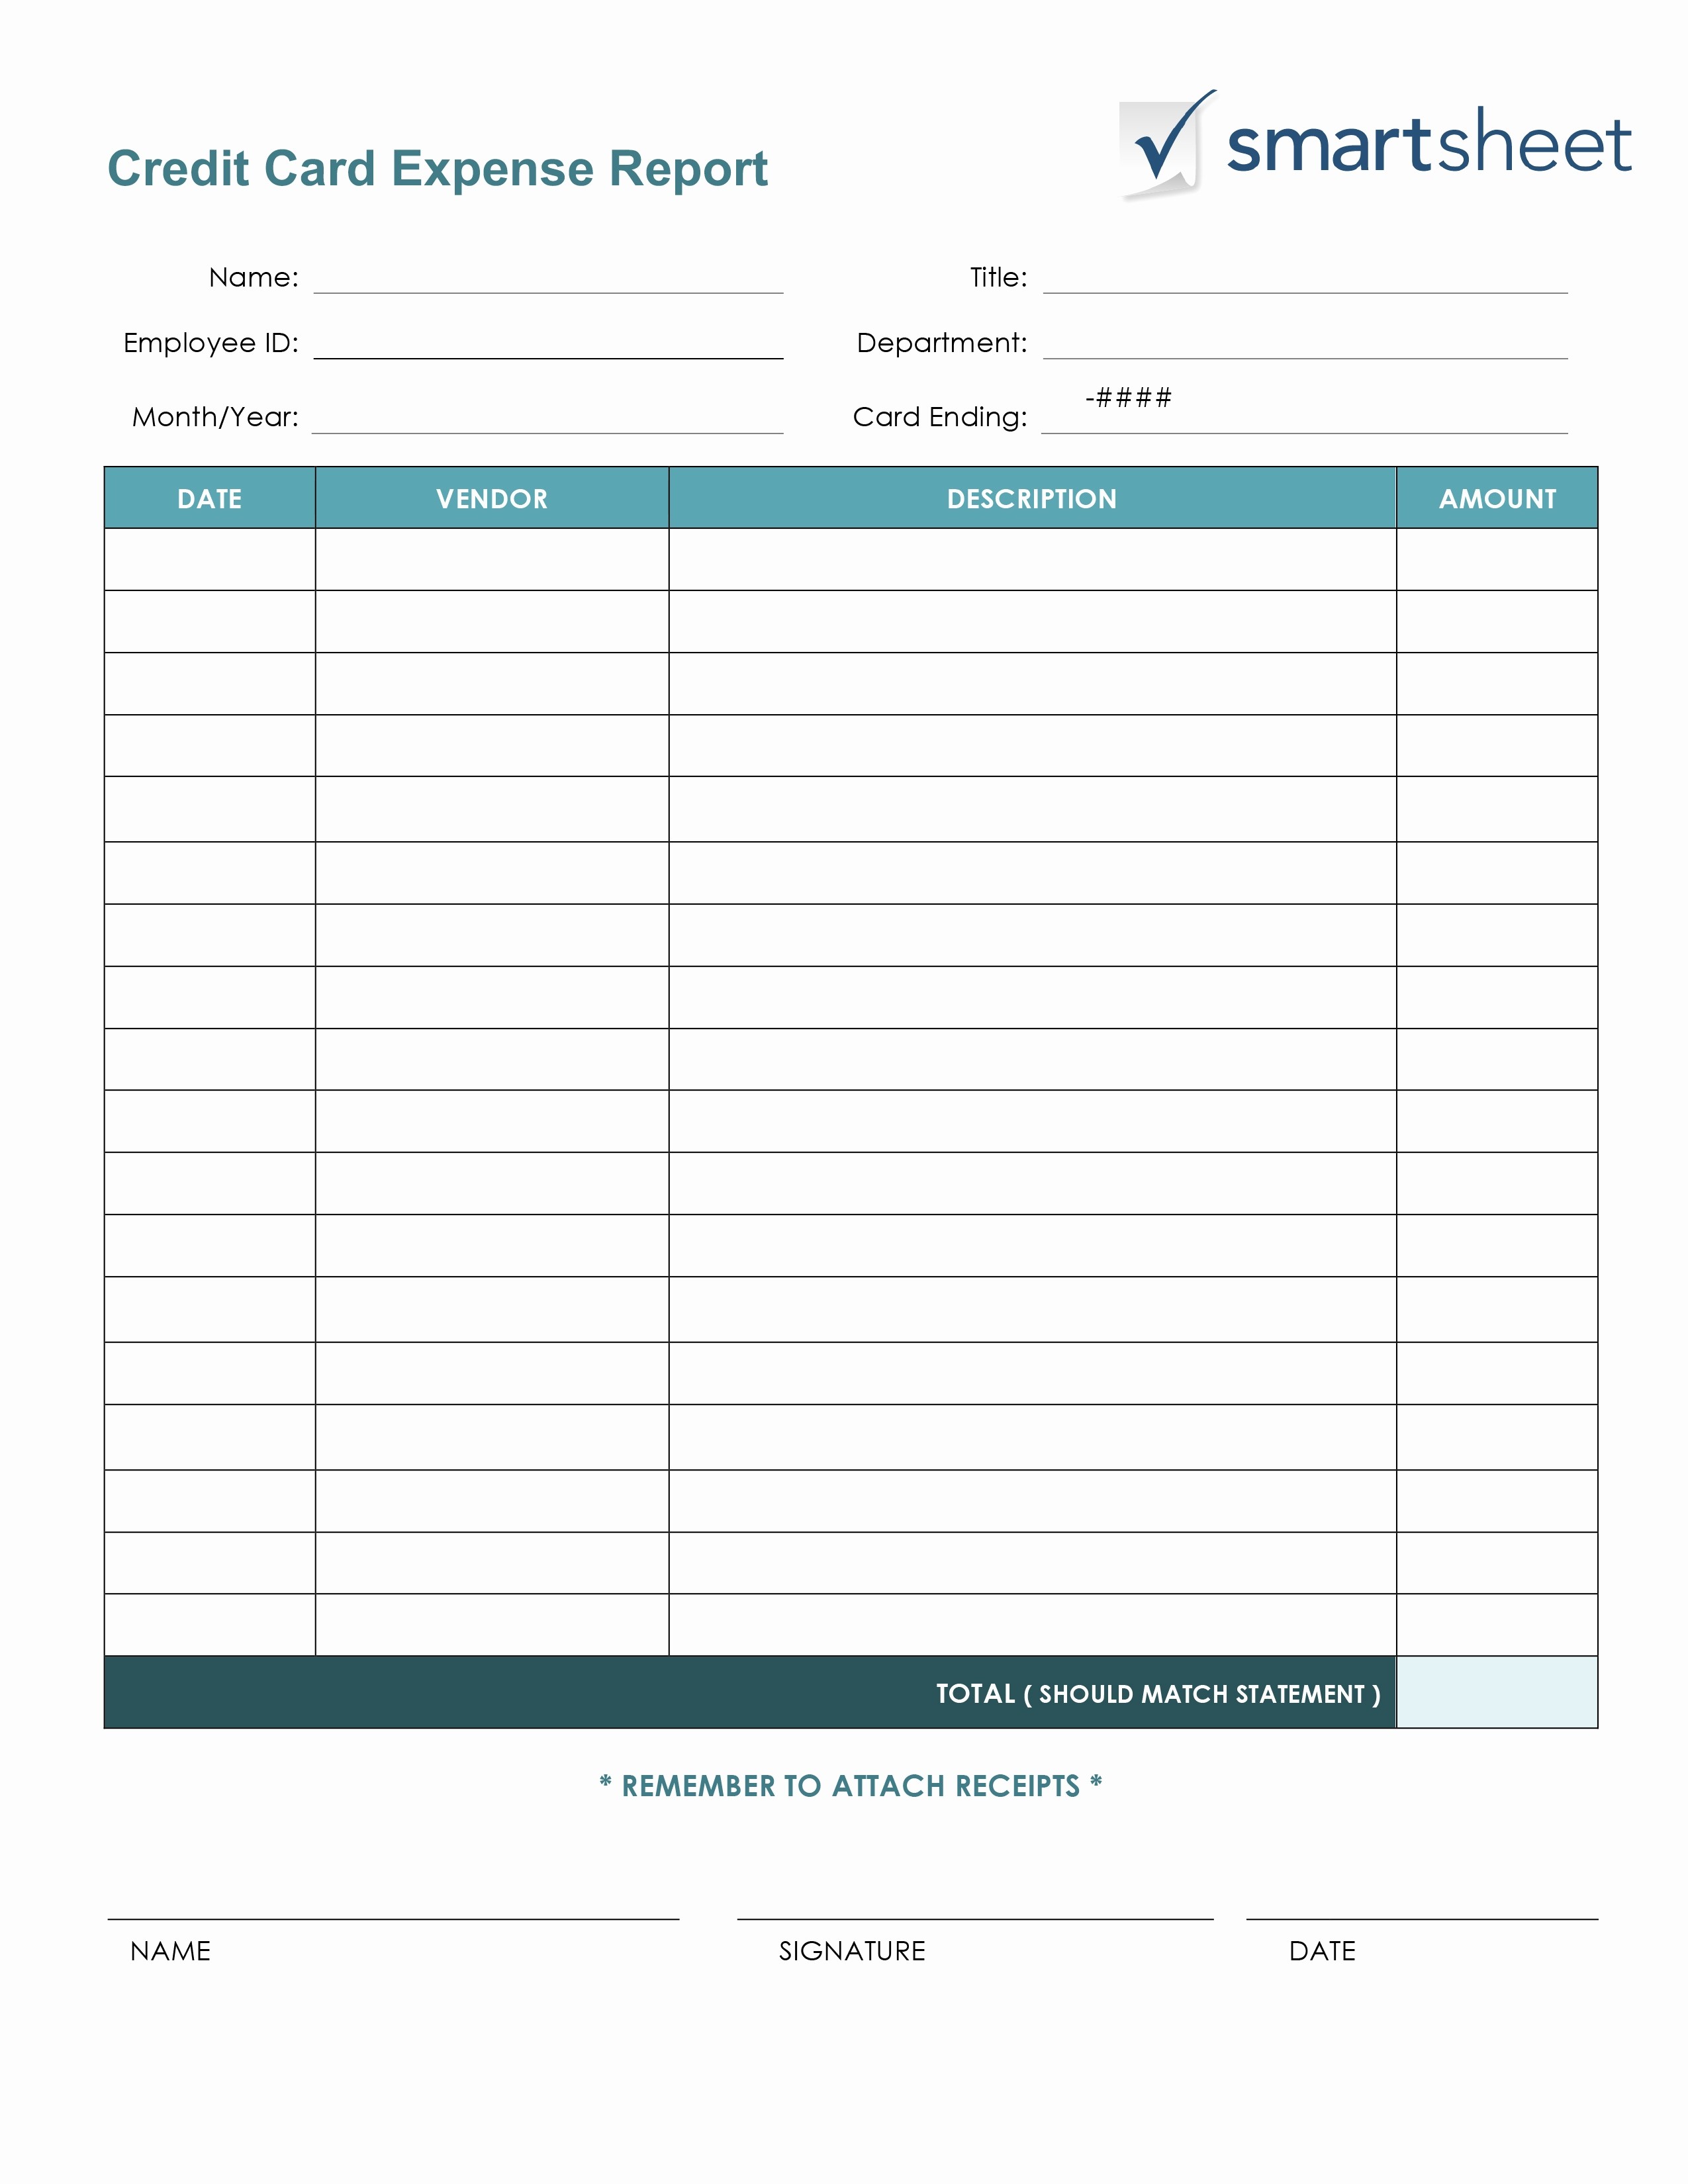 Annual Expense Report Template Beautiful 50 Best Business Document